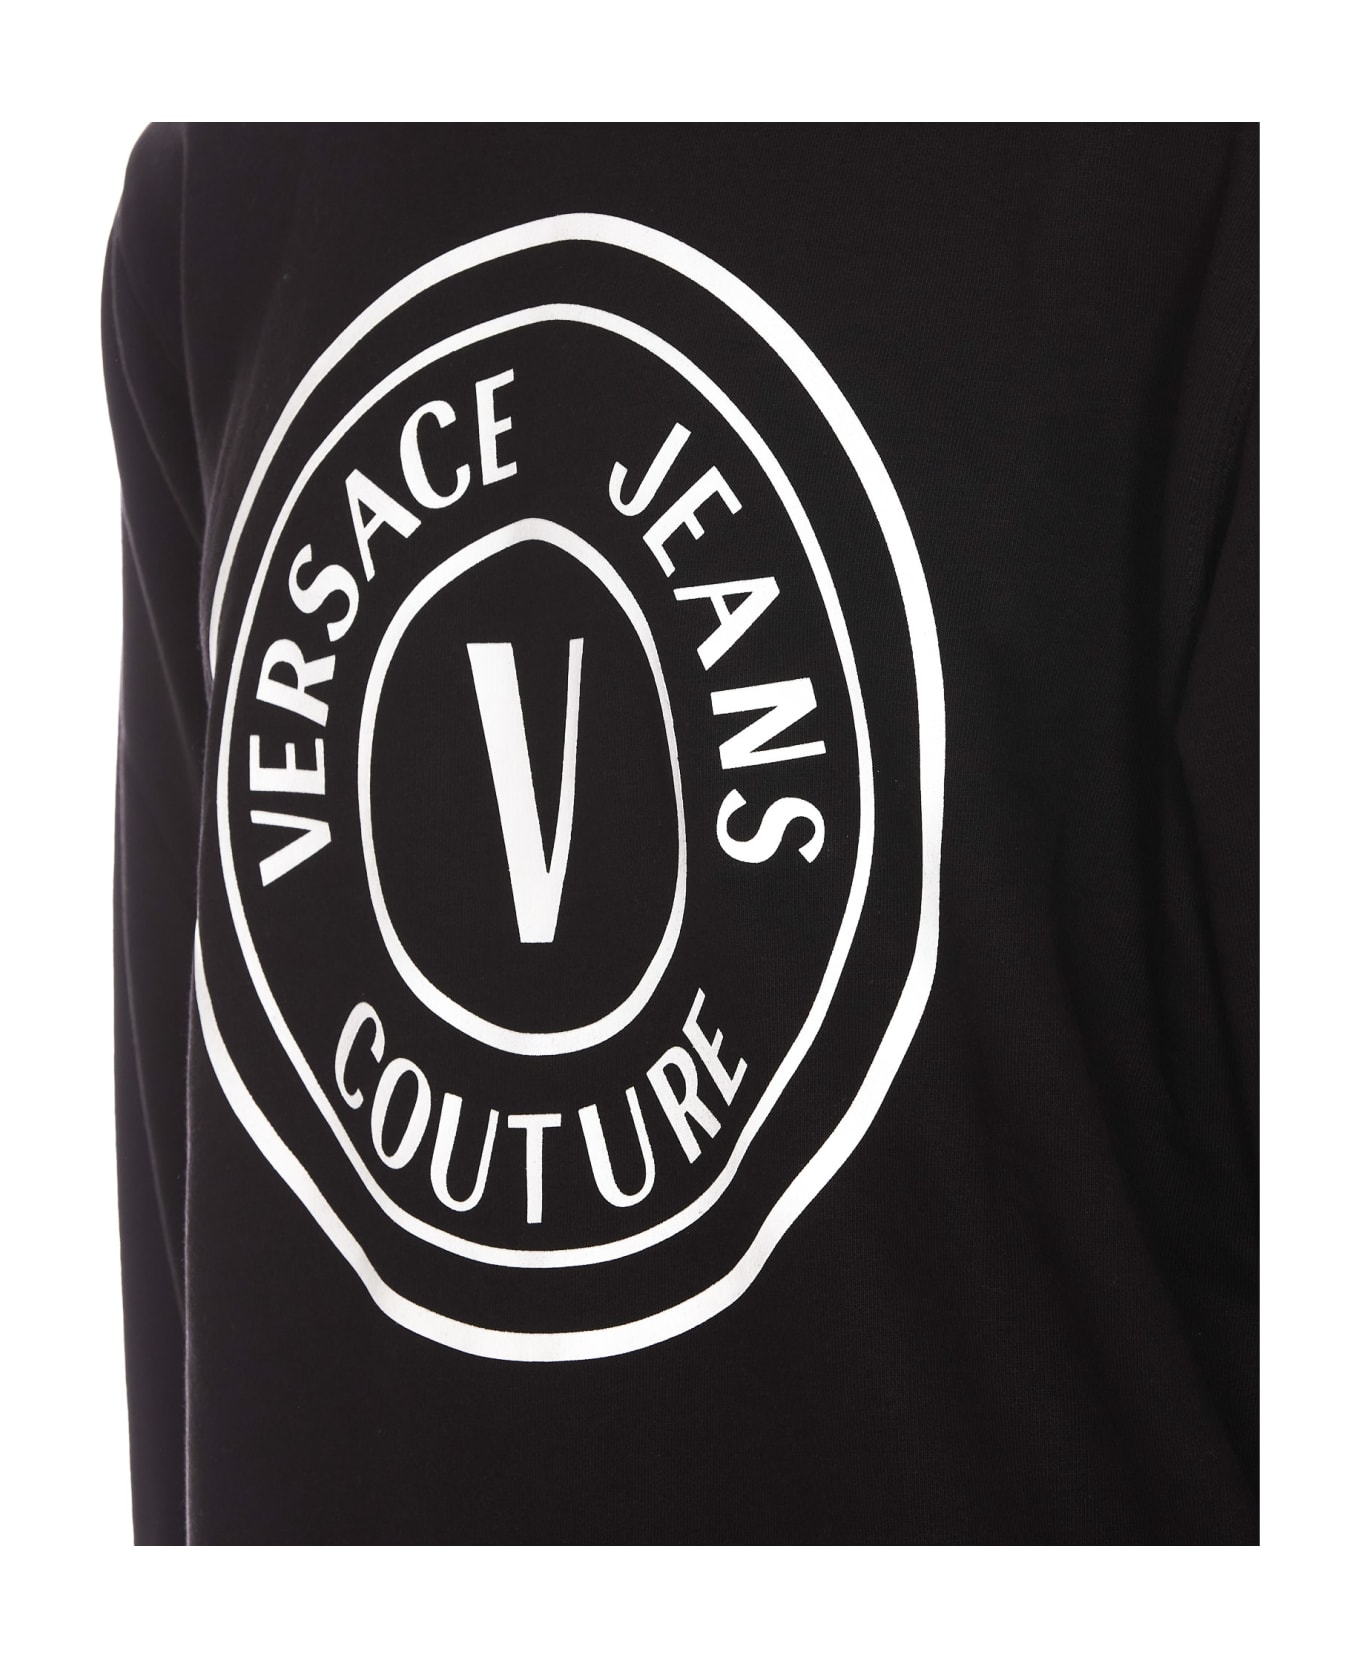 Versace Jeans Couture Hoodie - Nero